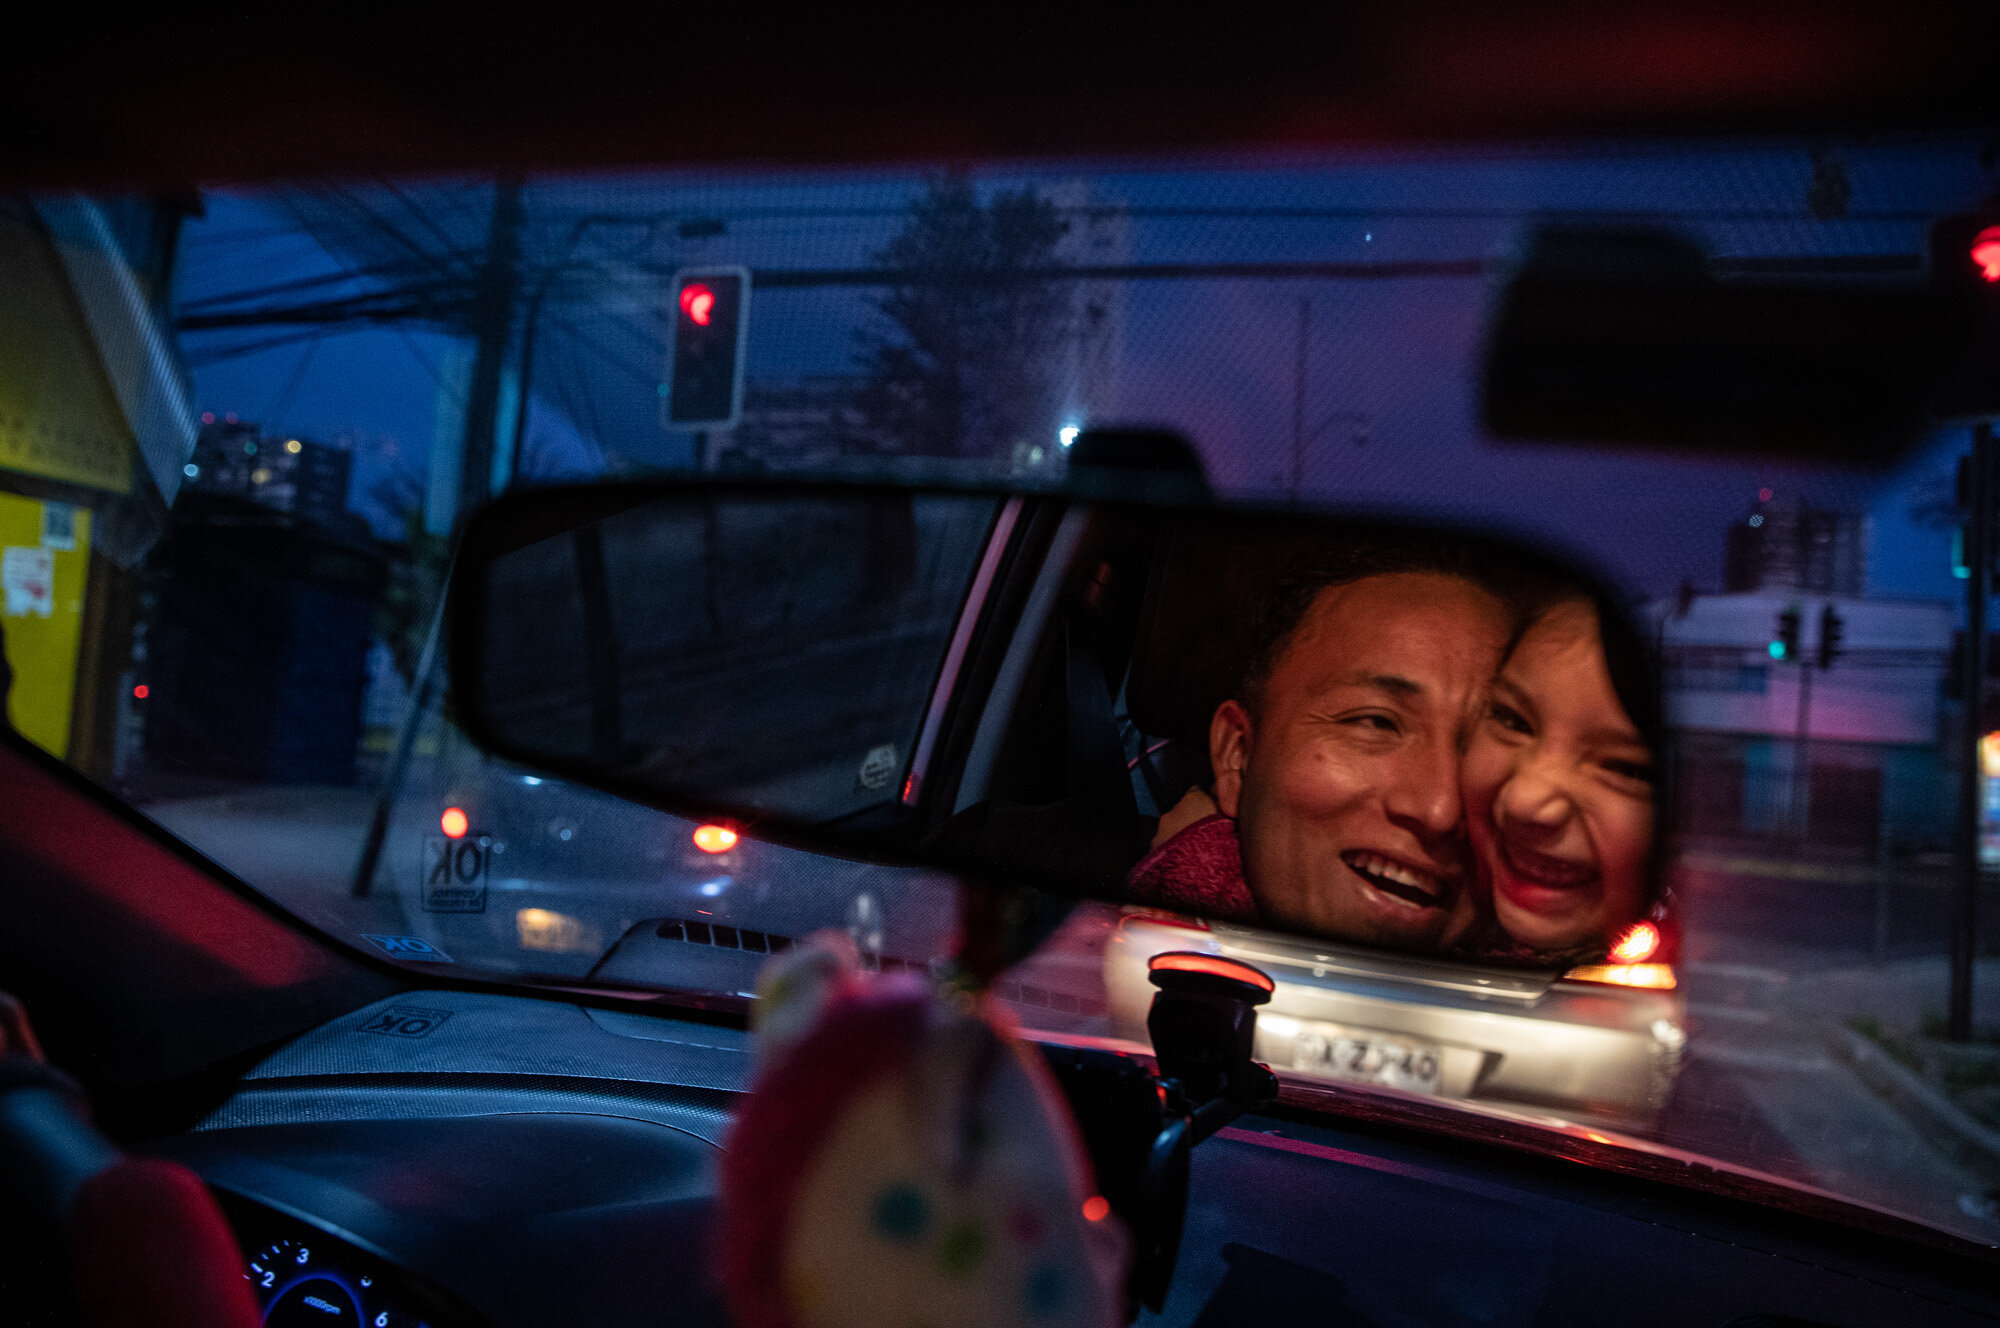  Reflected in the rearview mirror, Jose Collantes gets a hug from 5-year-old daughter Kehity while they're stopped at a red light, as Jose drives her home from a playdate in Santiago, Chile, on Sept. 6, 2020, three months after they lost his wife, he